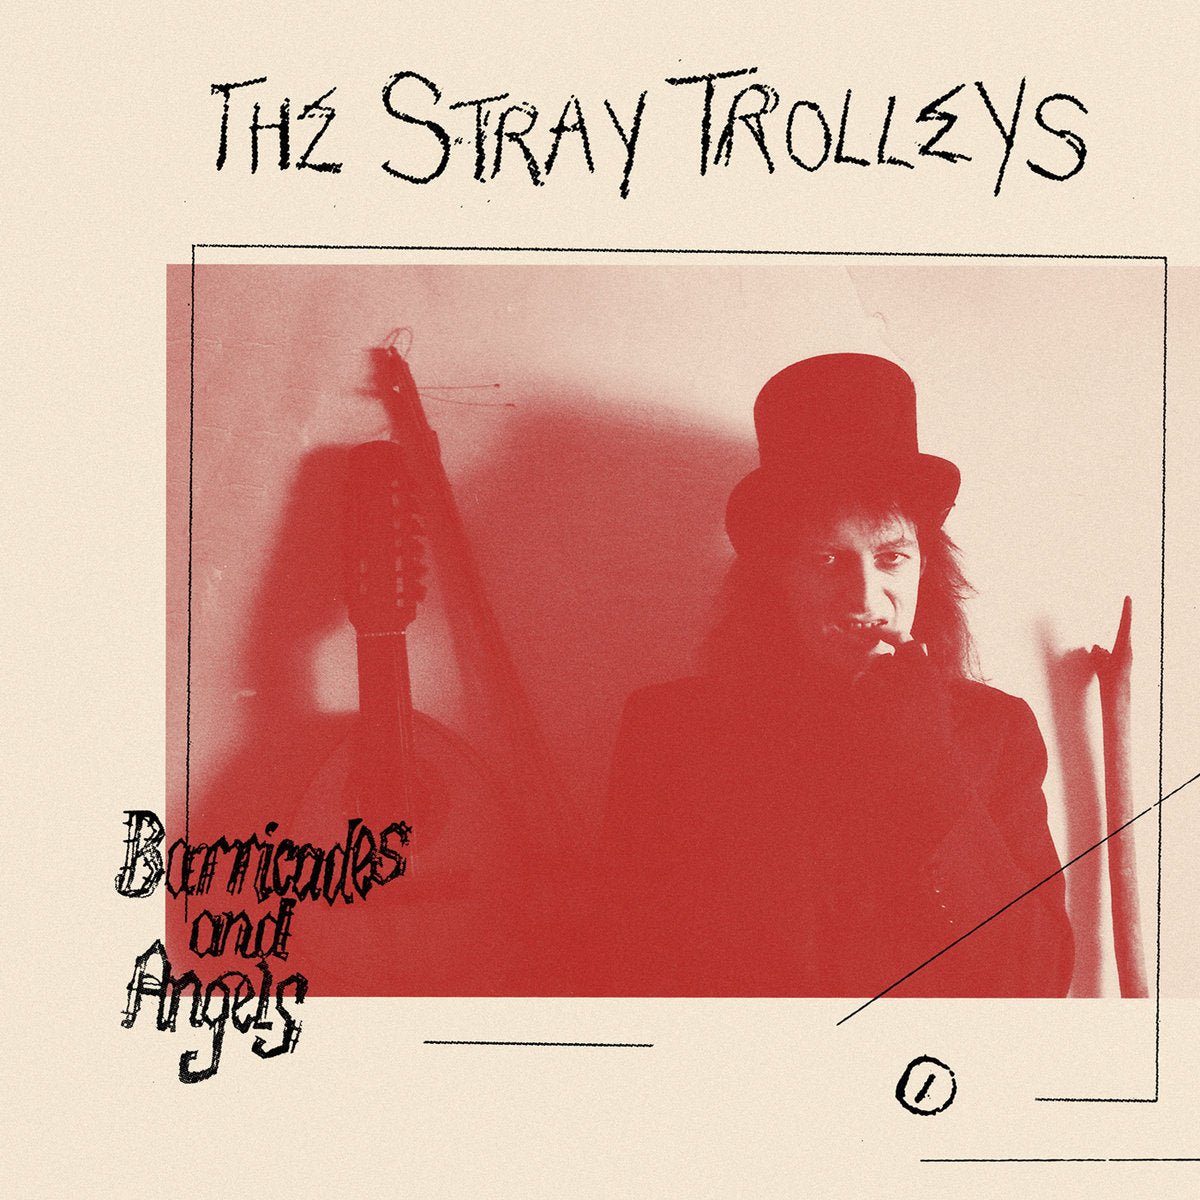 Stray Trolleys, The - Barricades and Angels